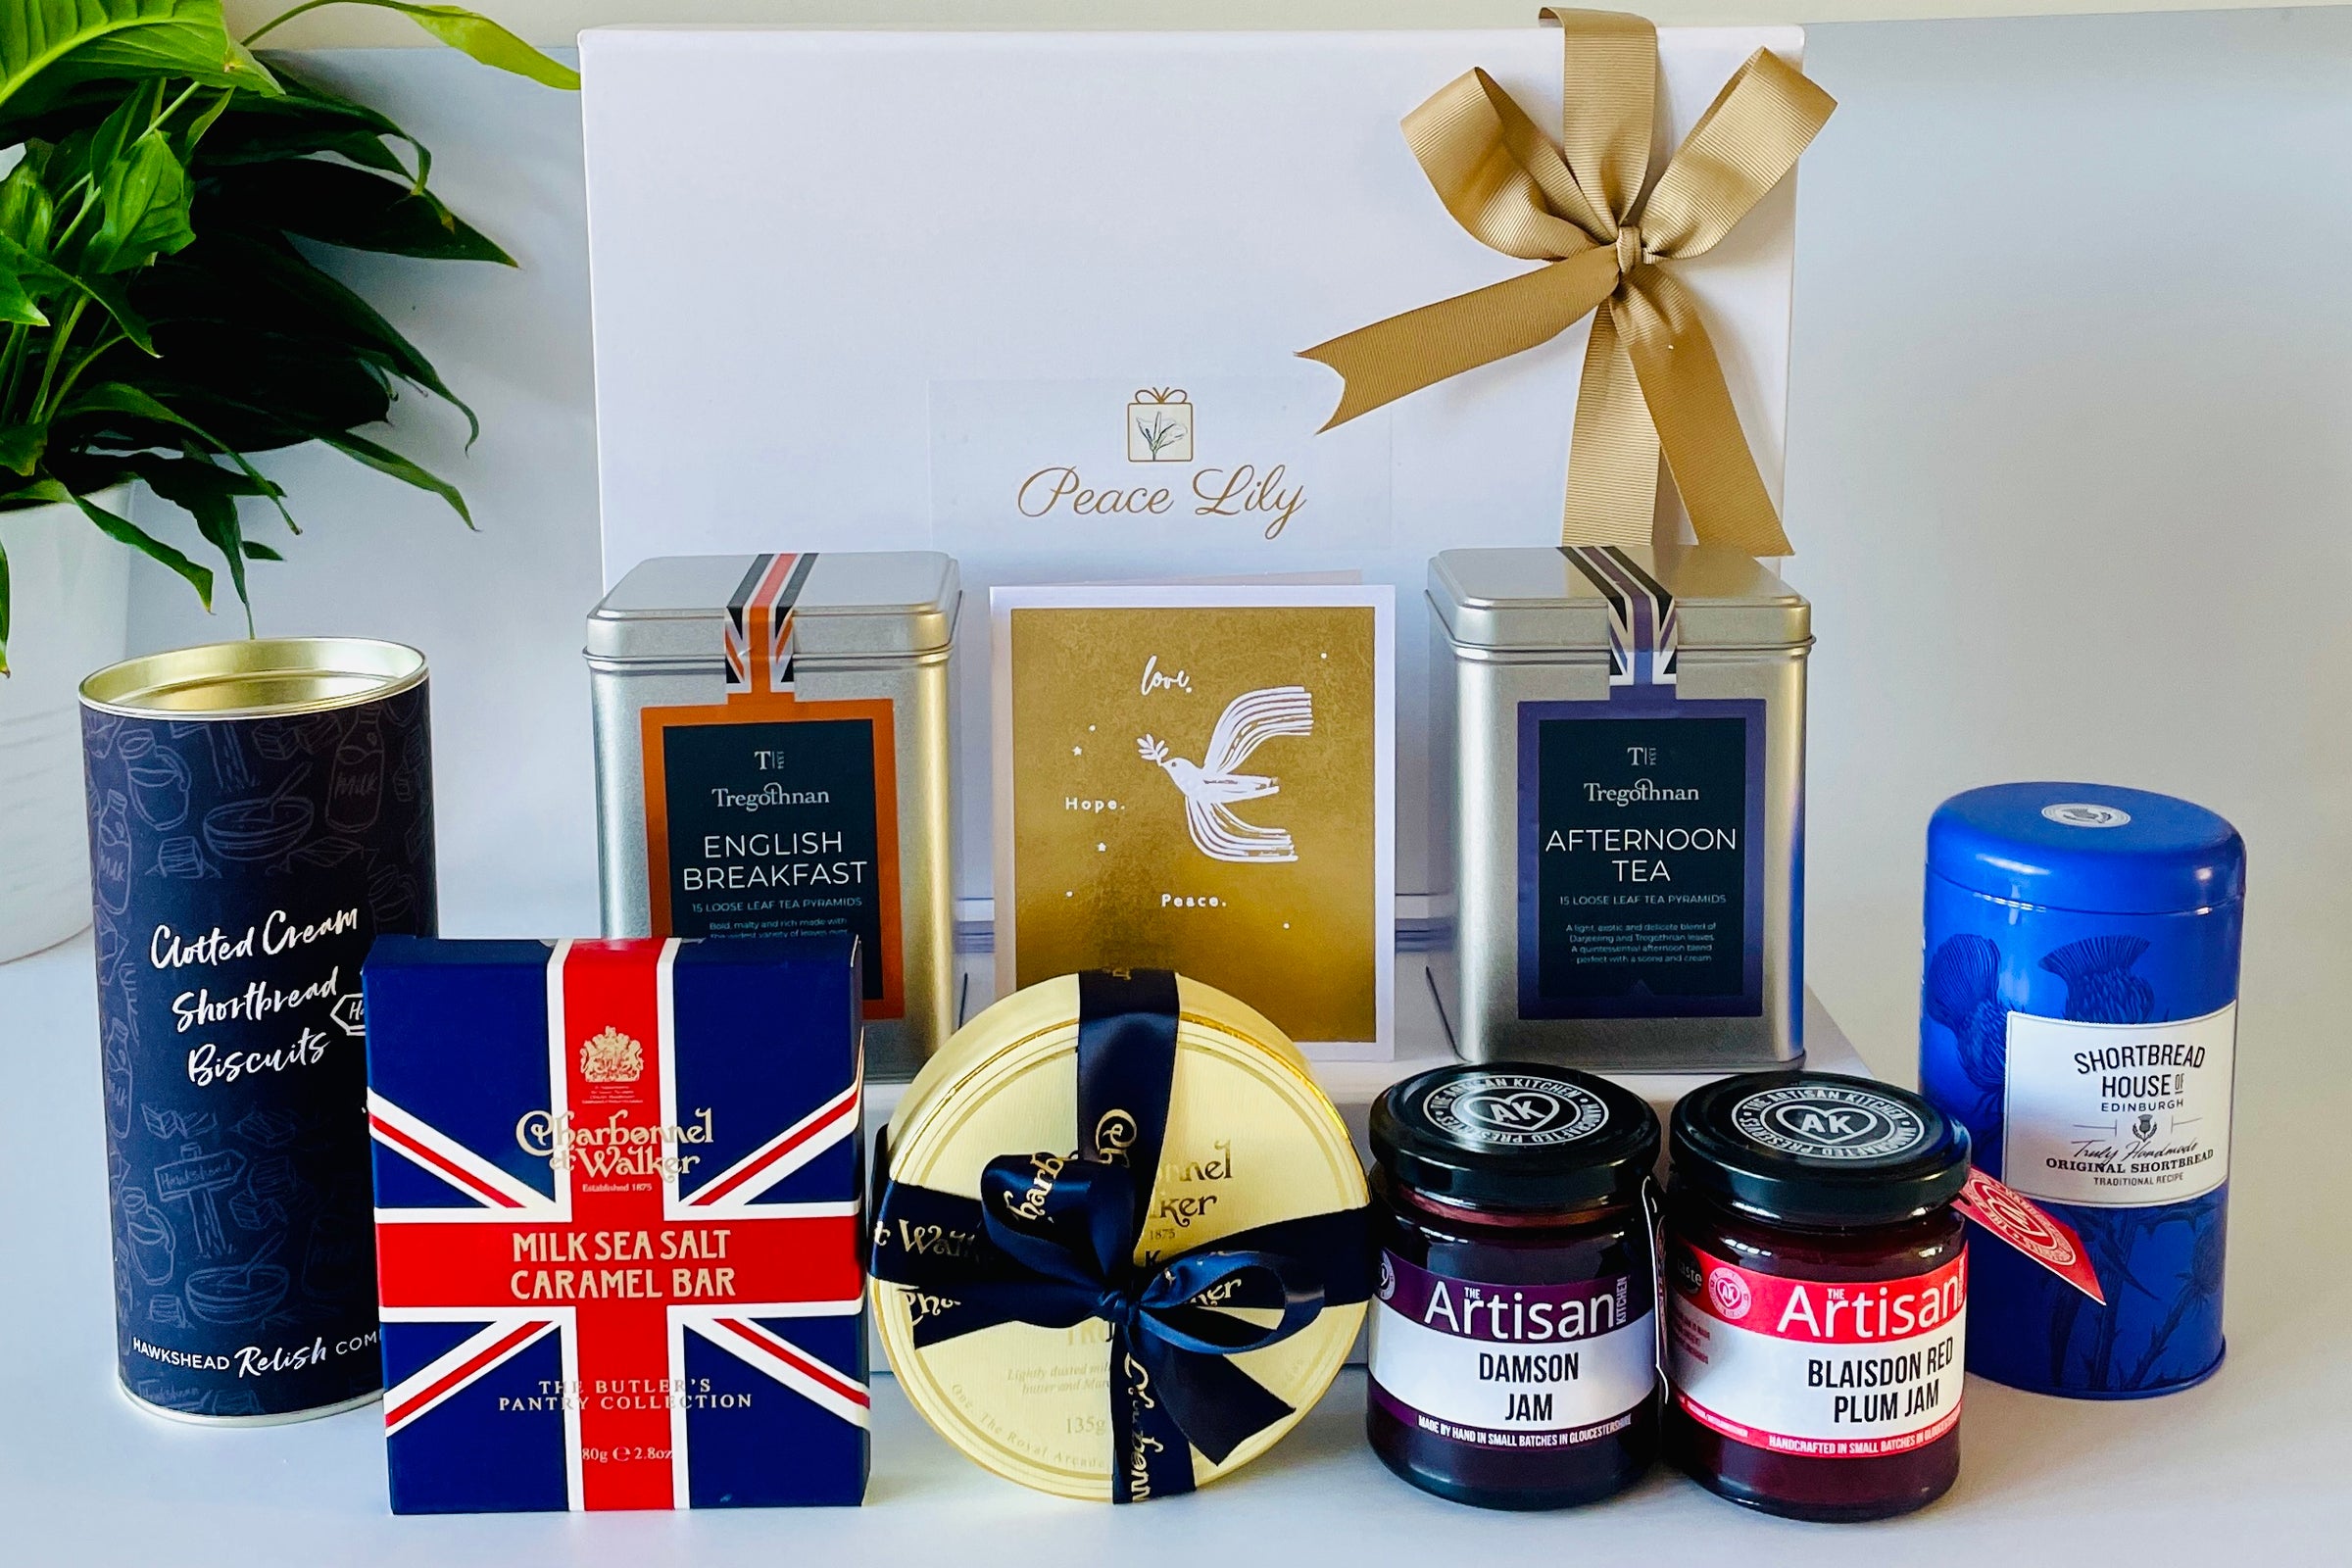 Peace Lily Afternoon Tea and Truffles Gift